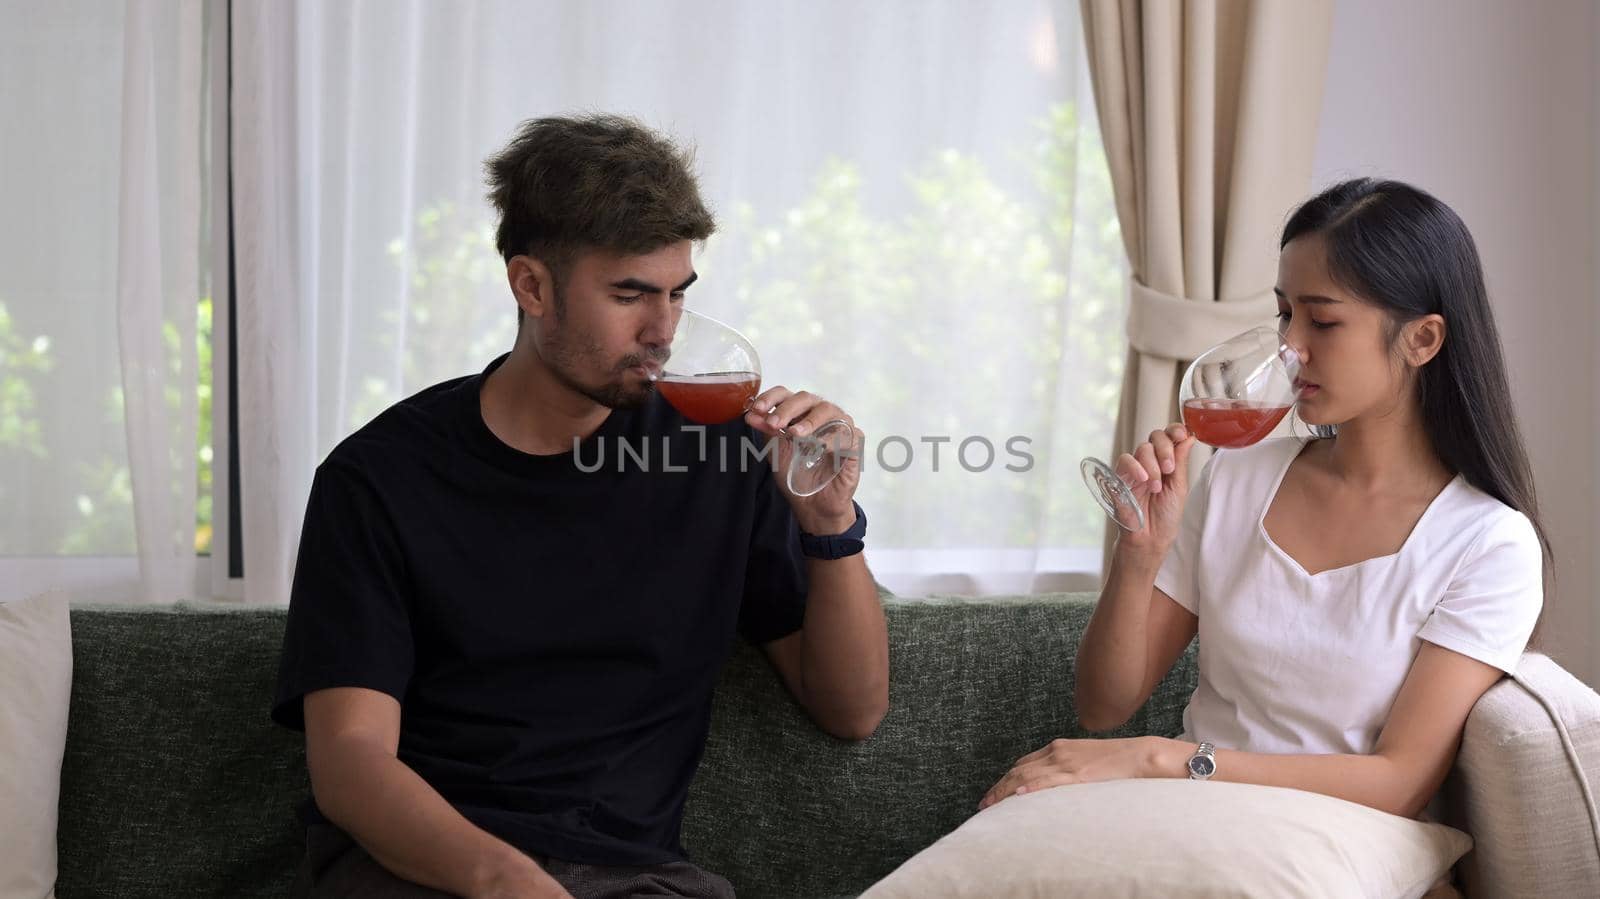 Happy couple resting on sofa and drinking wine. Leisure and celebration concept by prathanchorruangsak